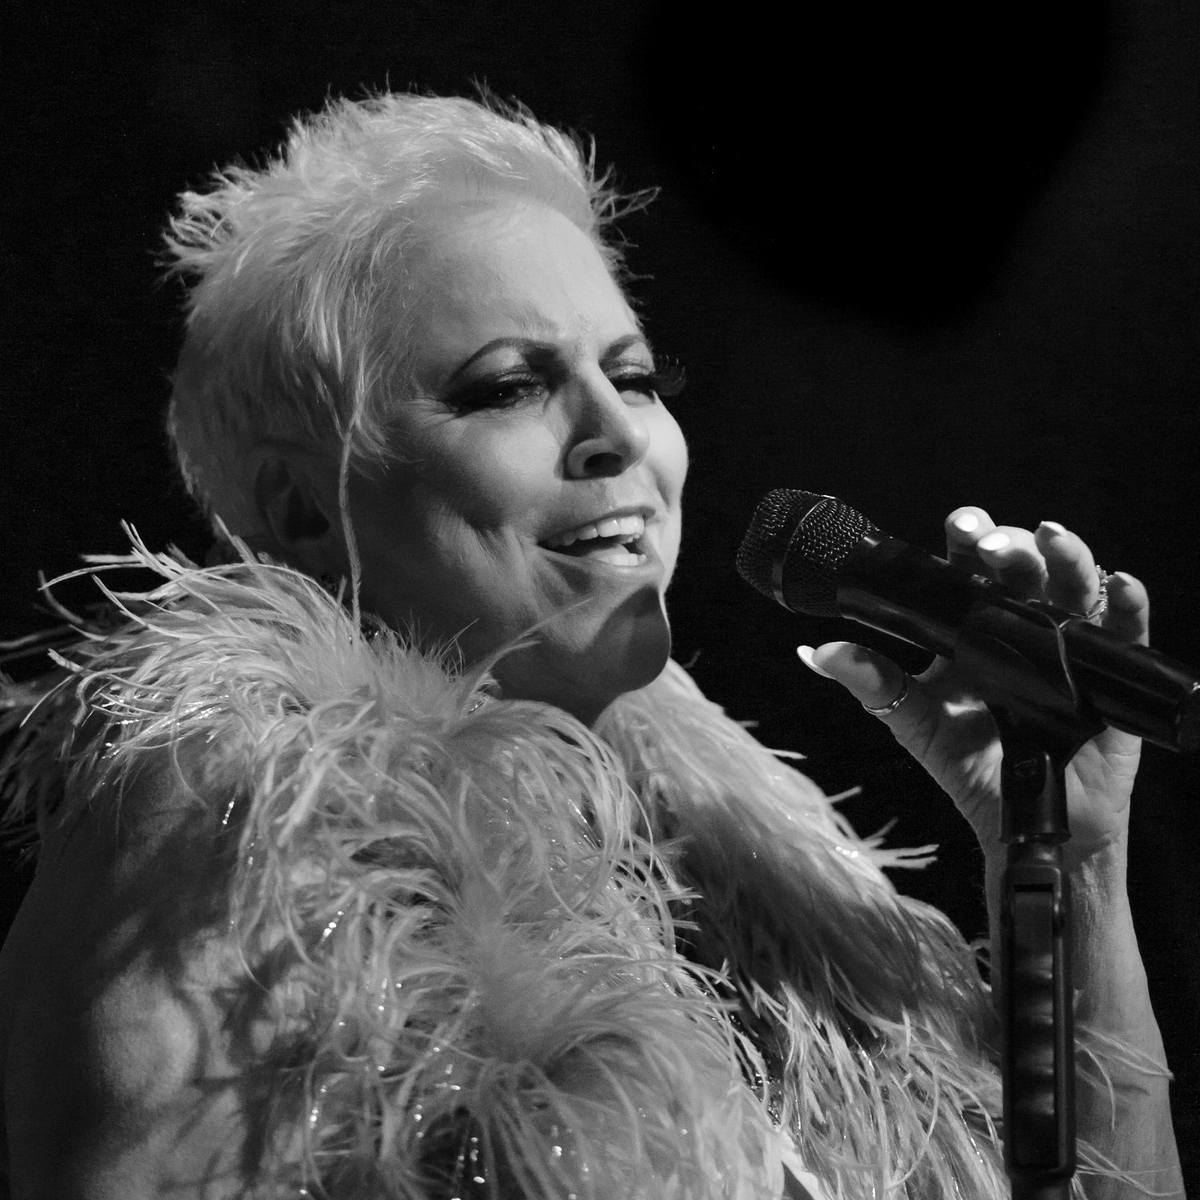 IF ANYONE CAN PULL OFF OSTRICH FEATHERS! Thursday's are full of sass, sex & songs, thanks to one of the desert's most popular singers Sharon Sills. Make your reservation today at OpenTable xx PR

#purpleroom #palmsprings #sharonsills